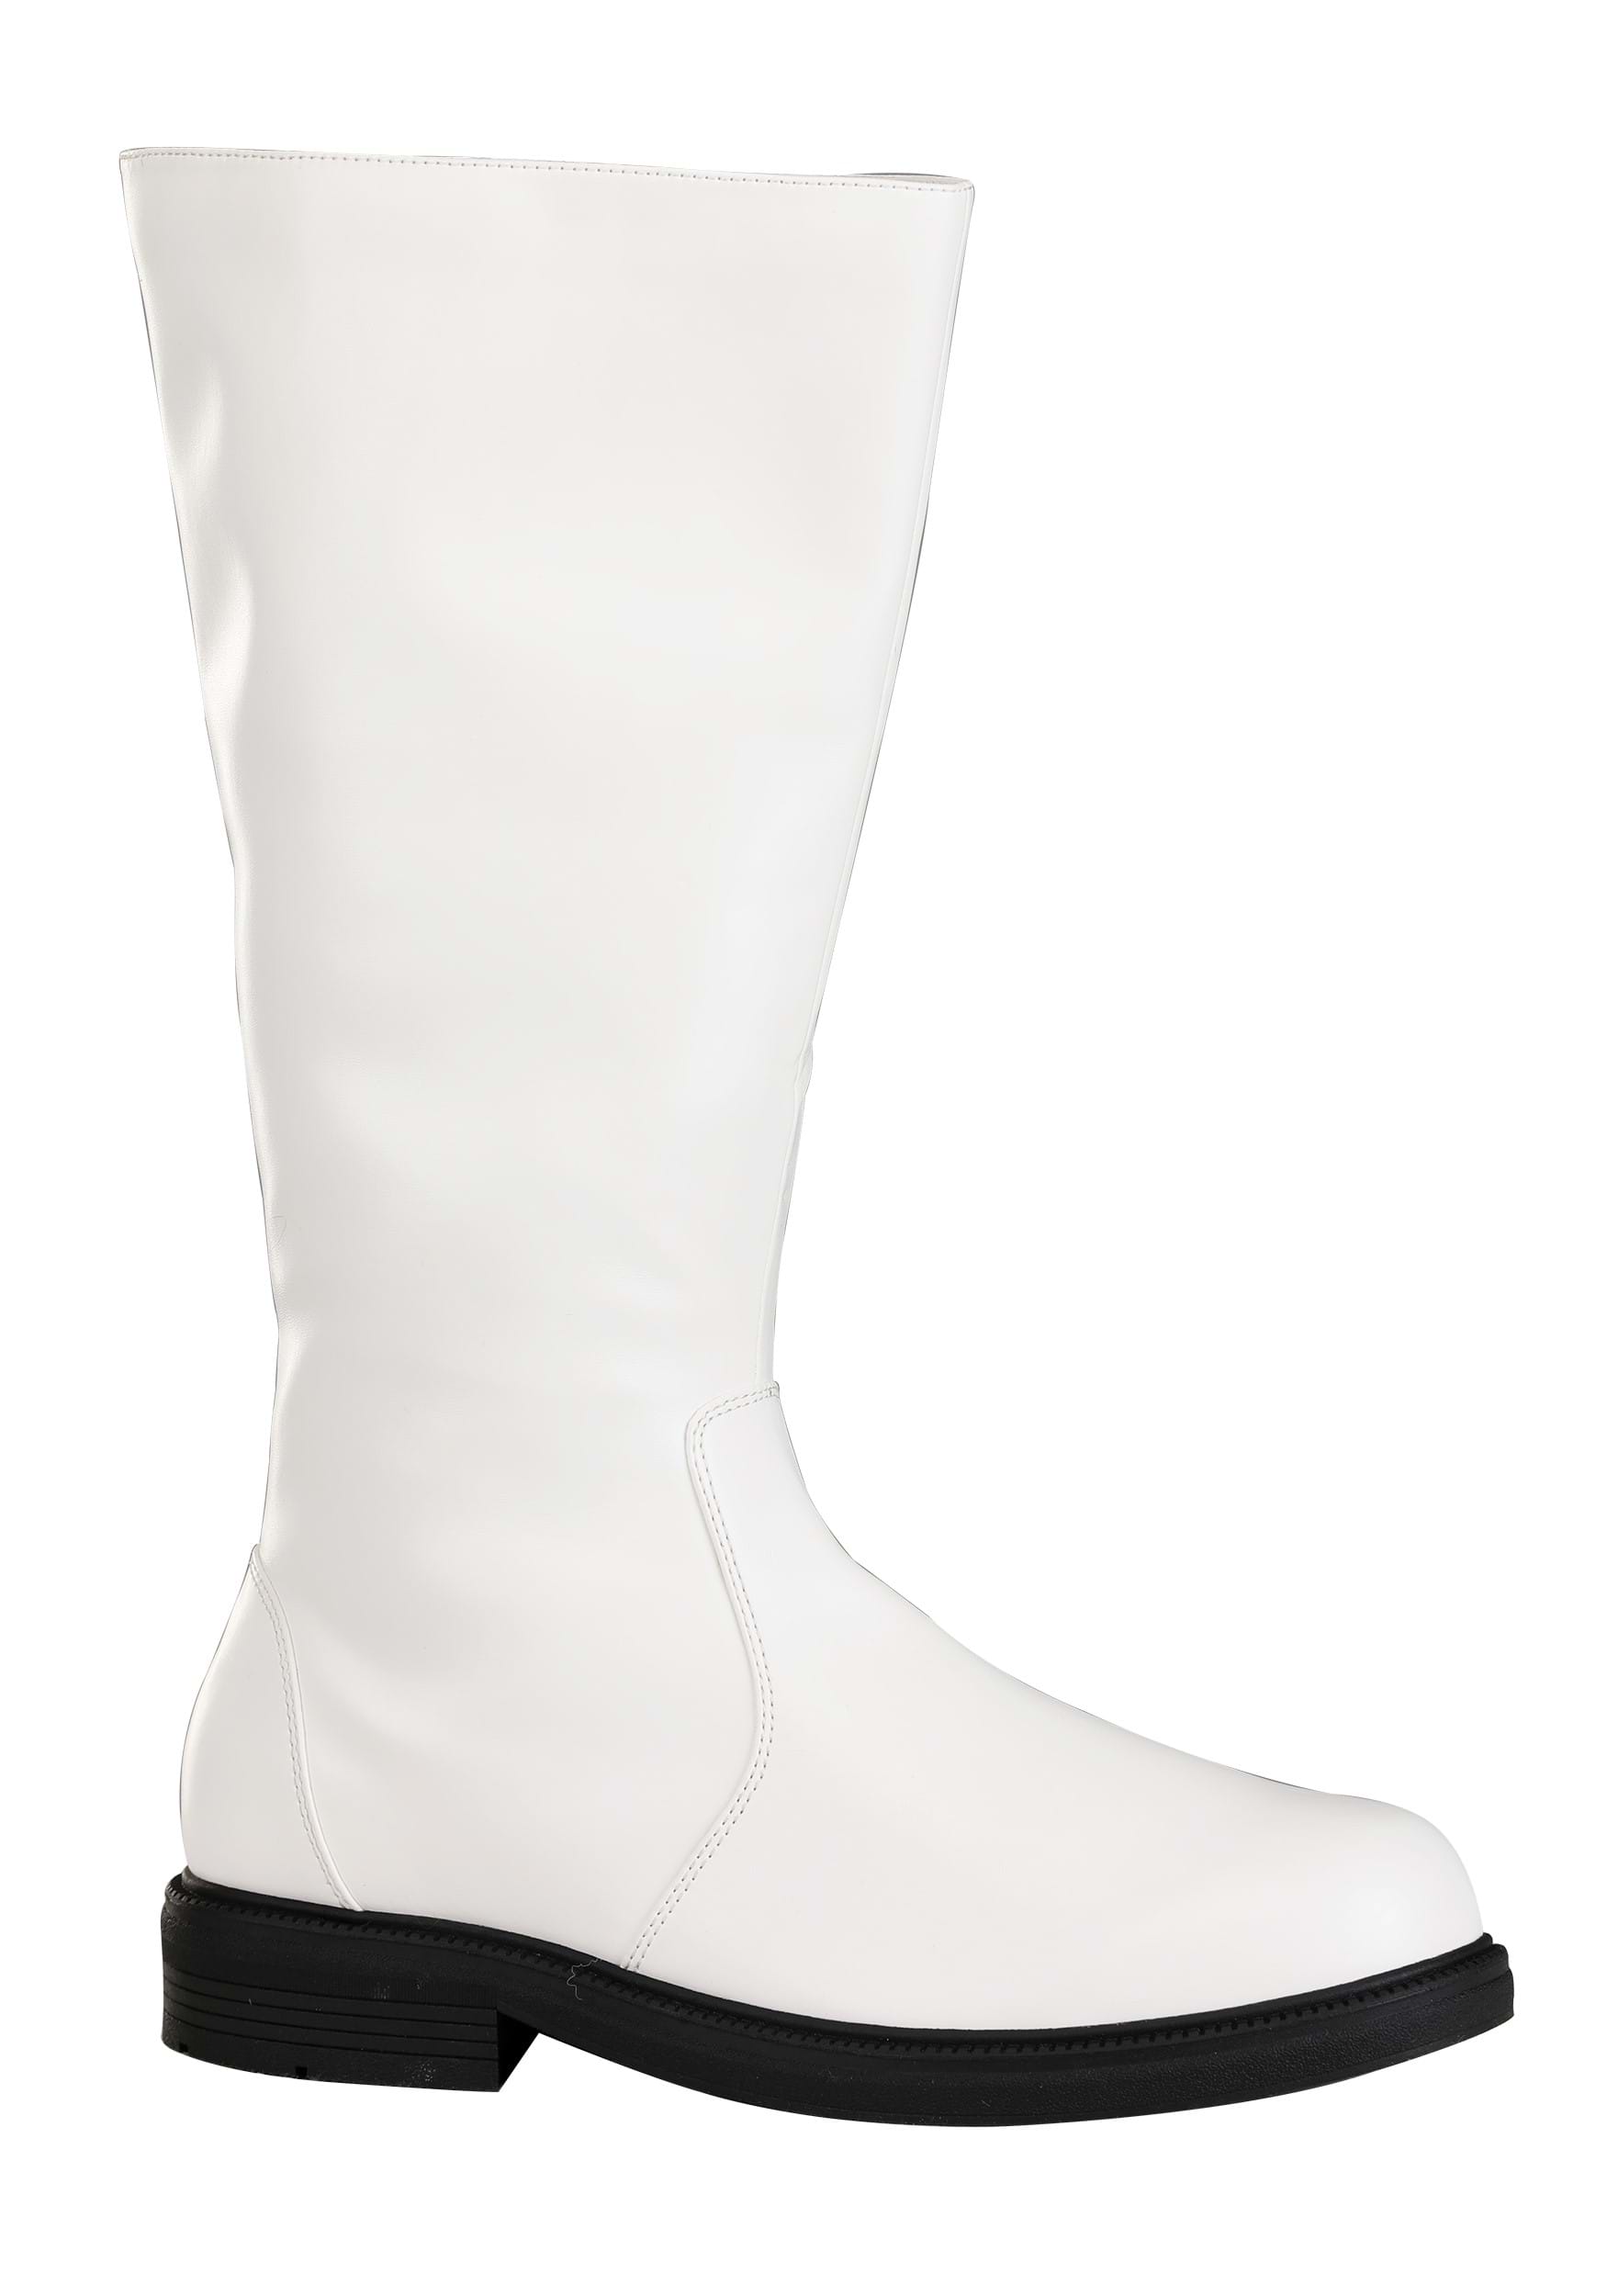 Tall White Adult Boots